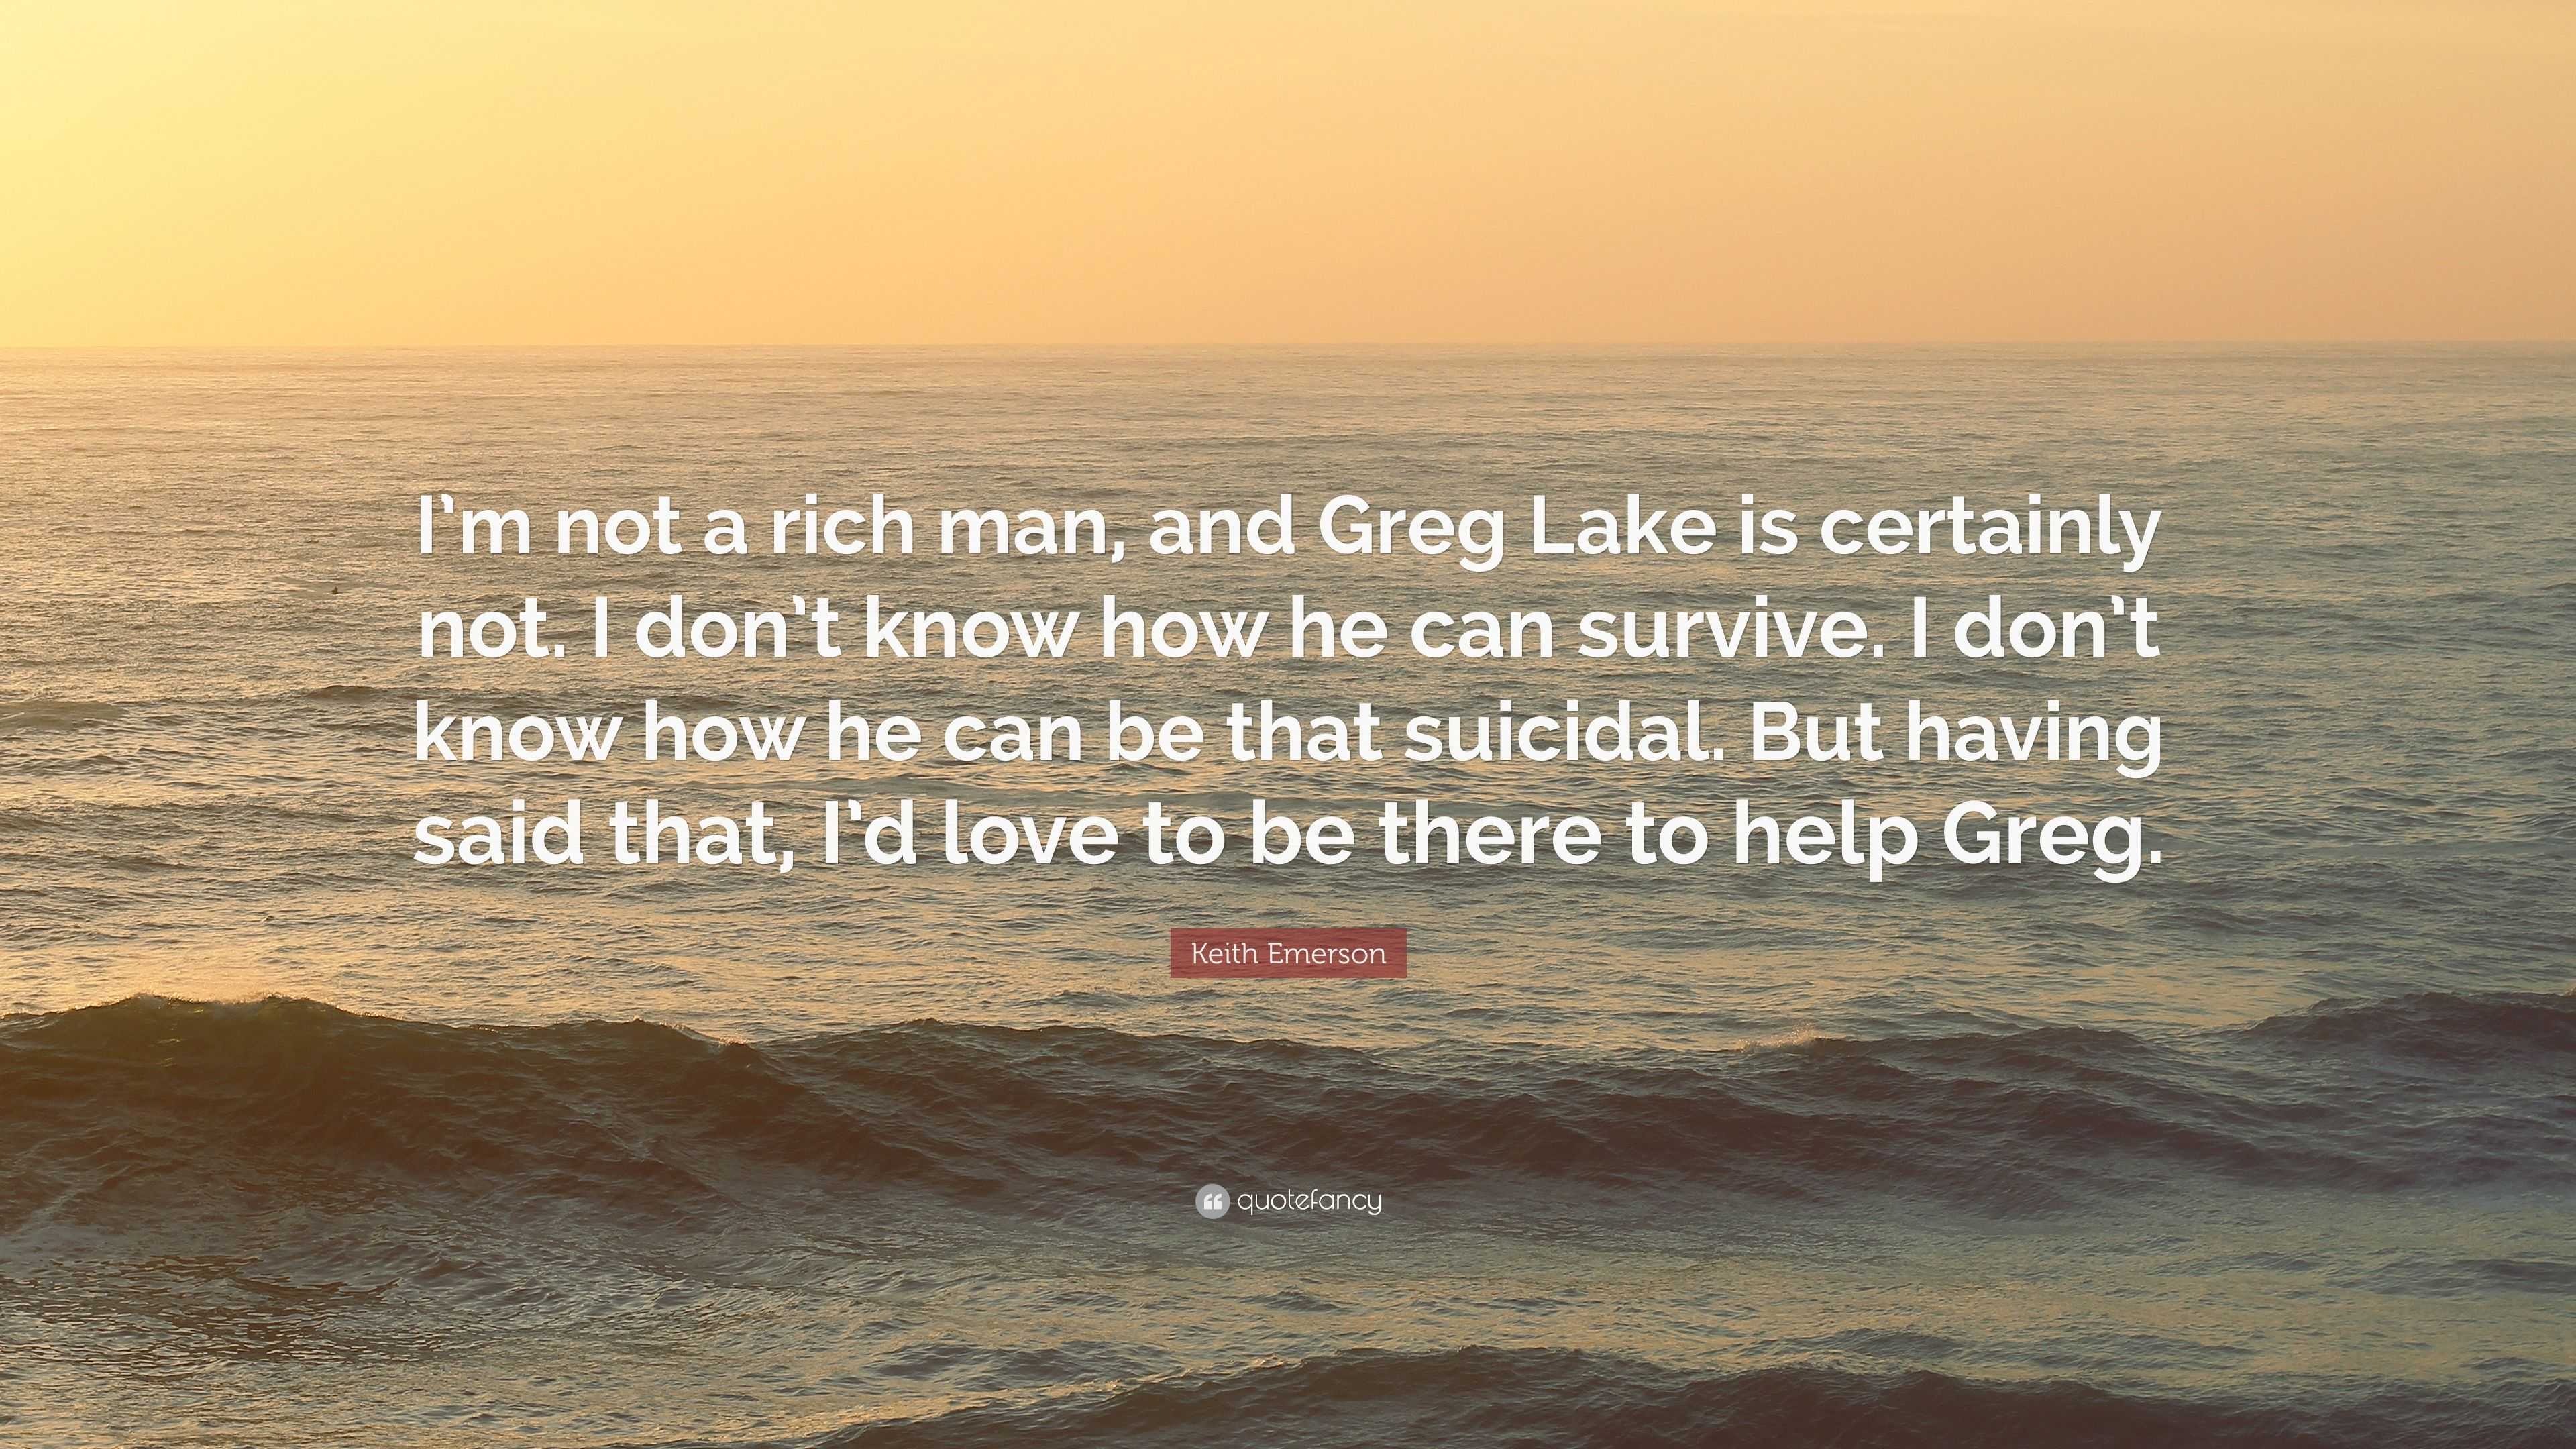 Keith Emerson Quote: I m not a rich man and Greg Lake is certainly